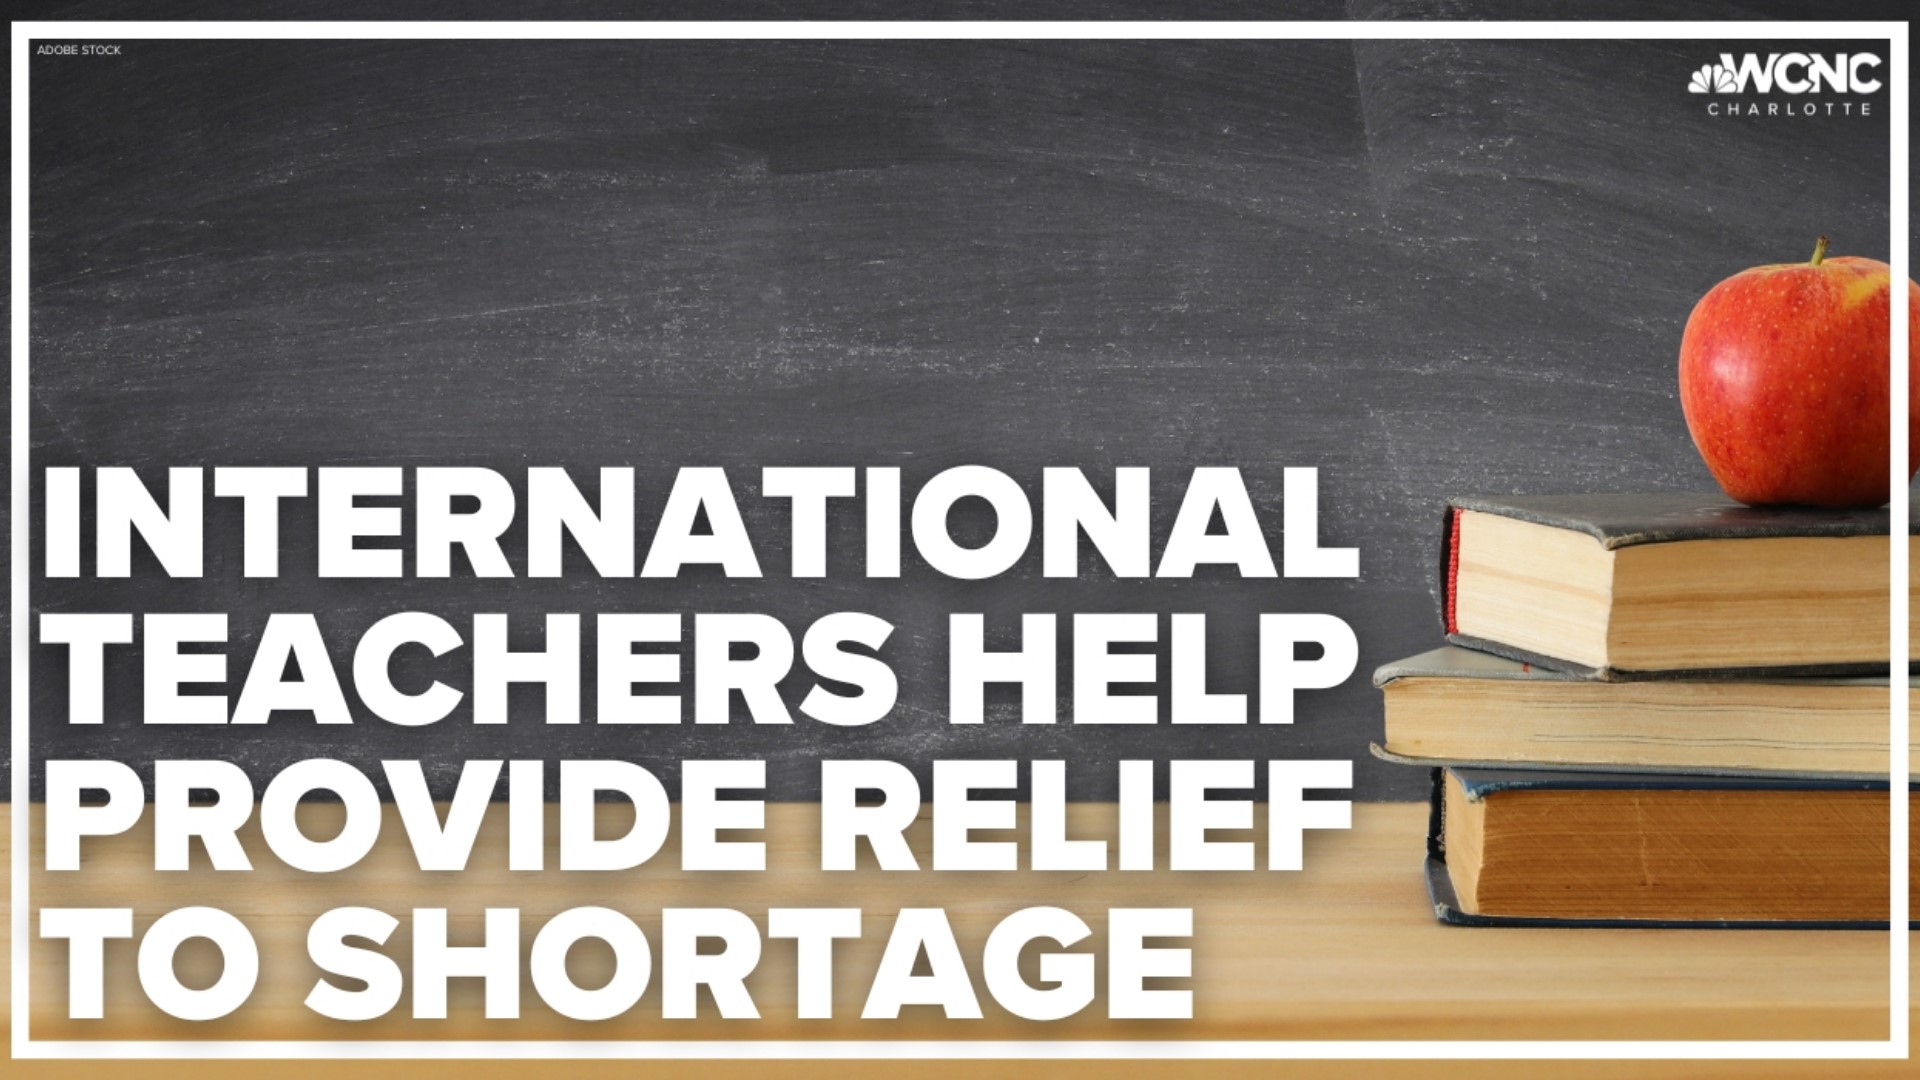 Shortages have made the critical role of international teachers coming to the United States to teach even more important.